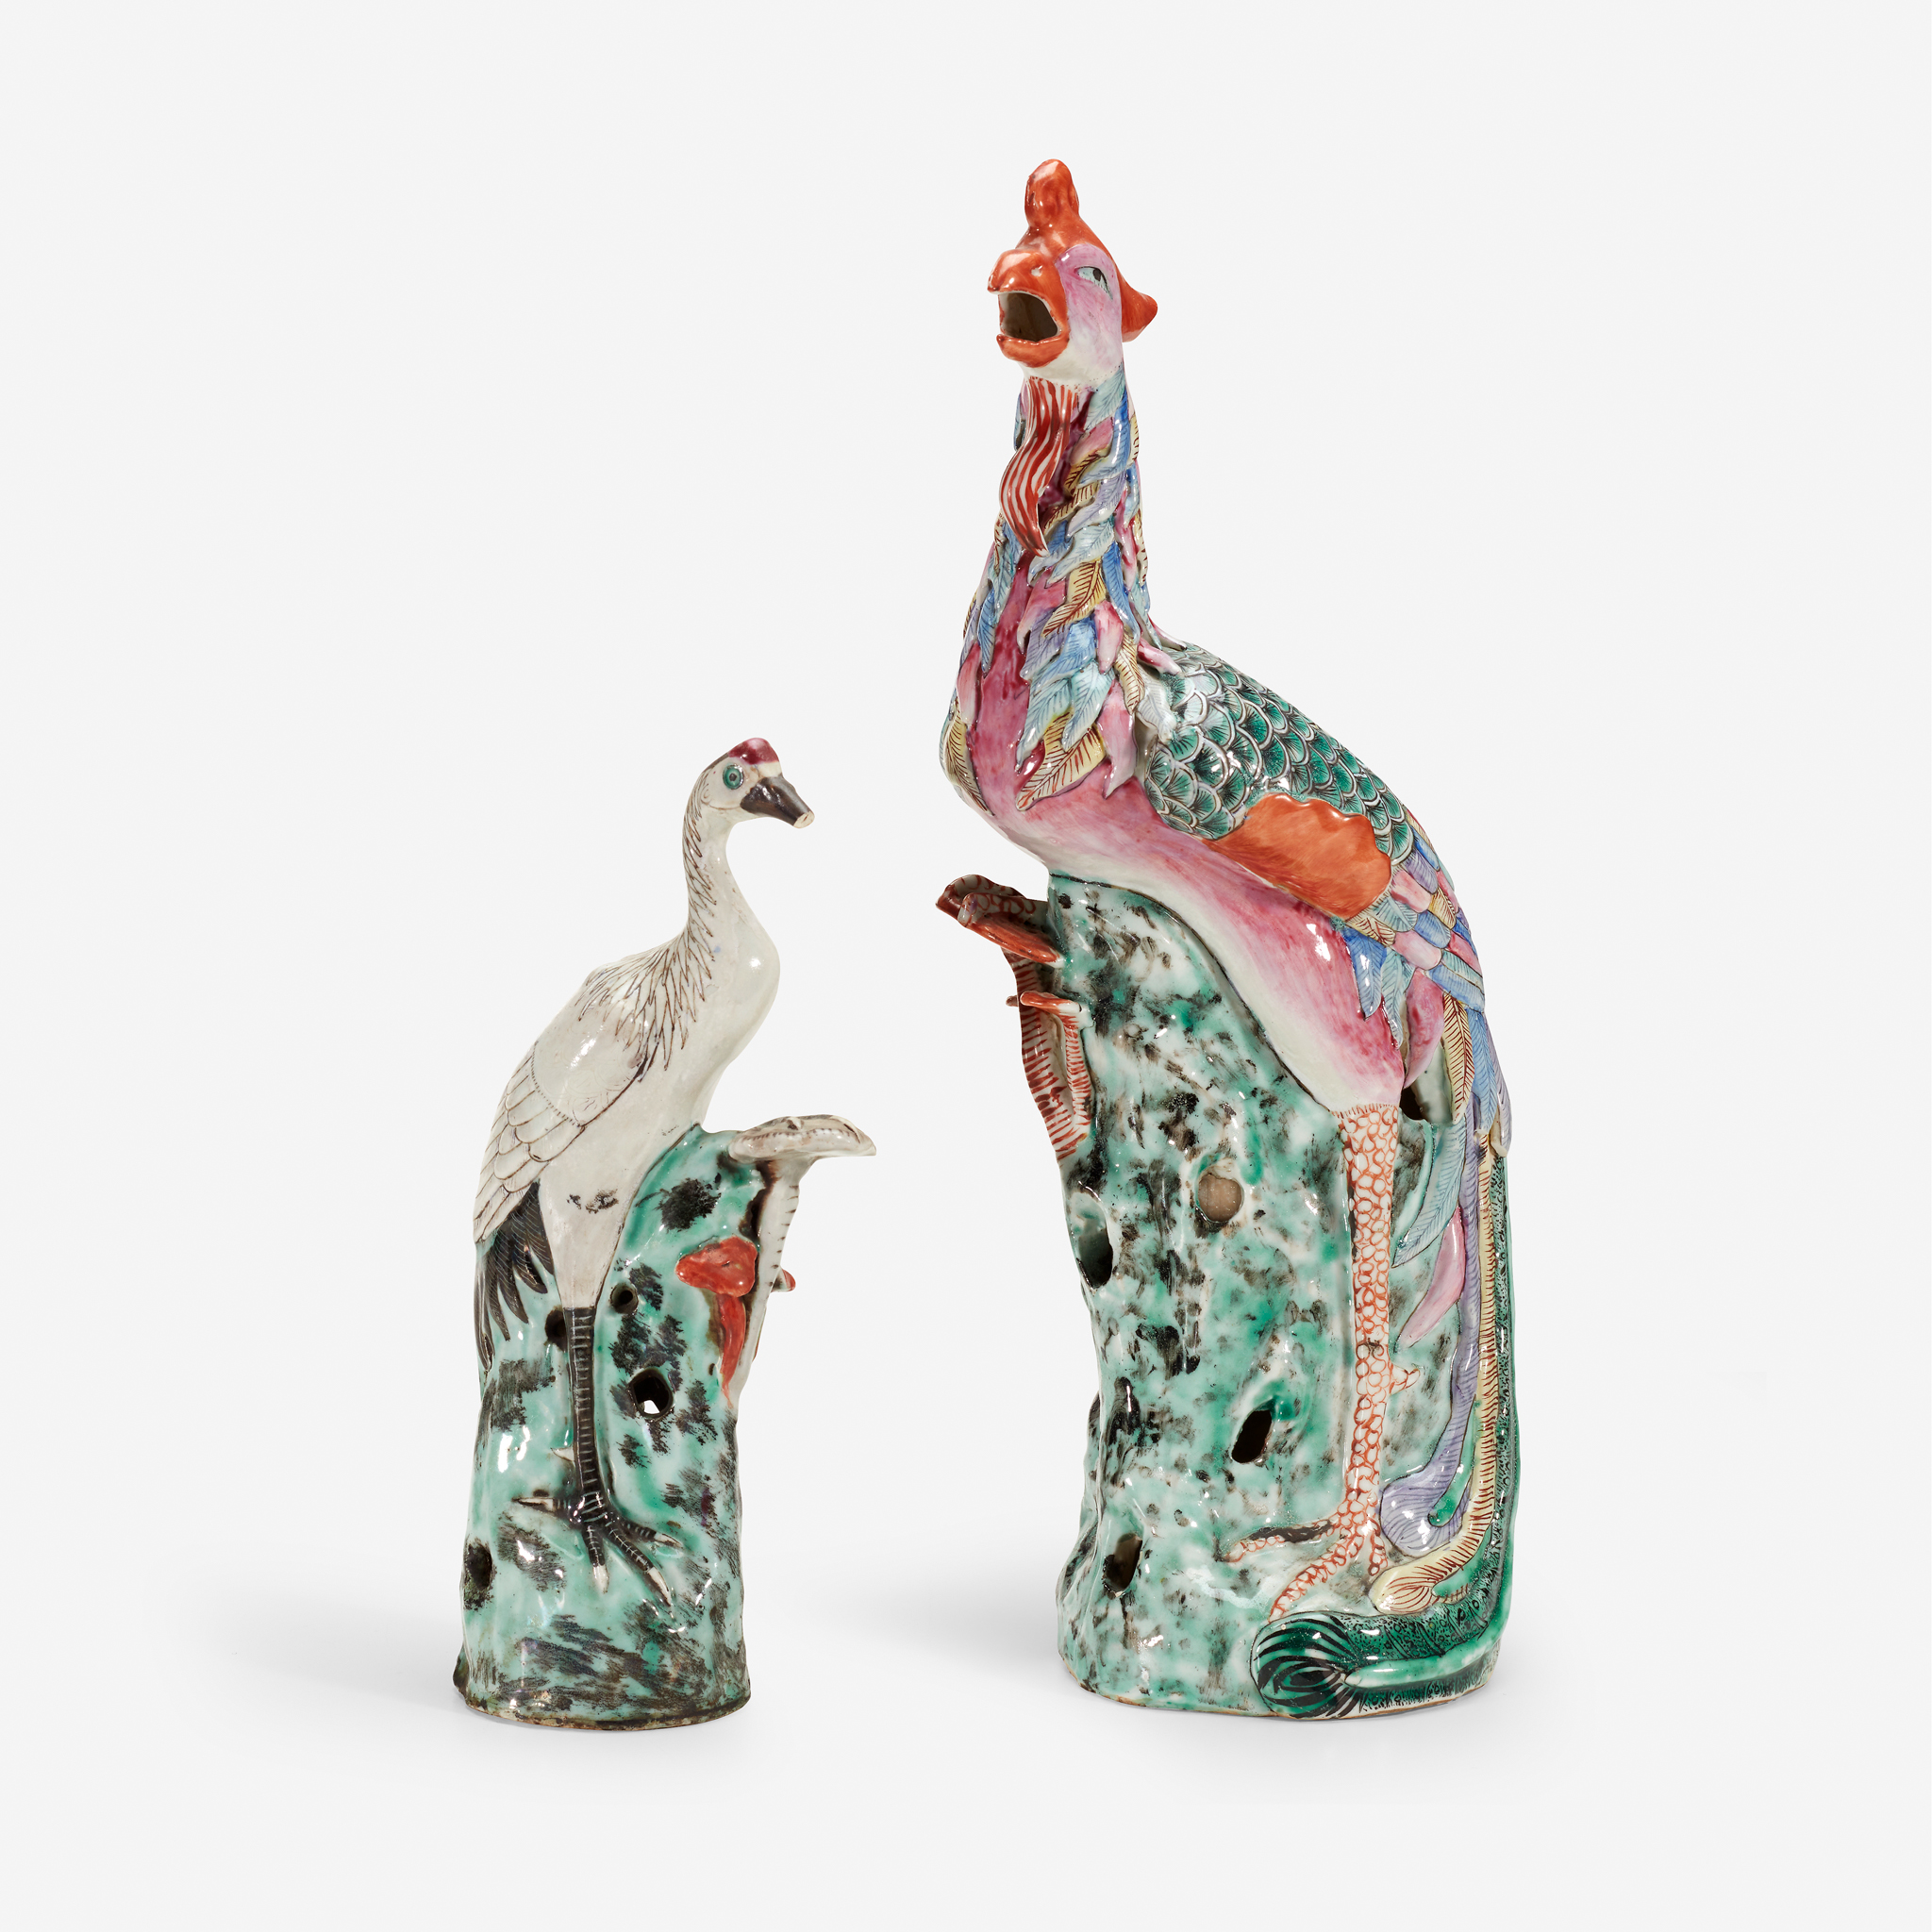 Two Chinese export porcelain polychrome enameled birds, 19th century